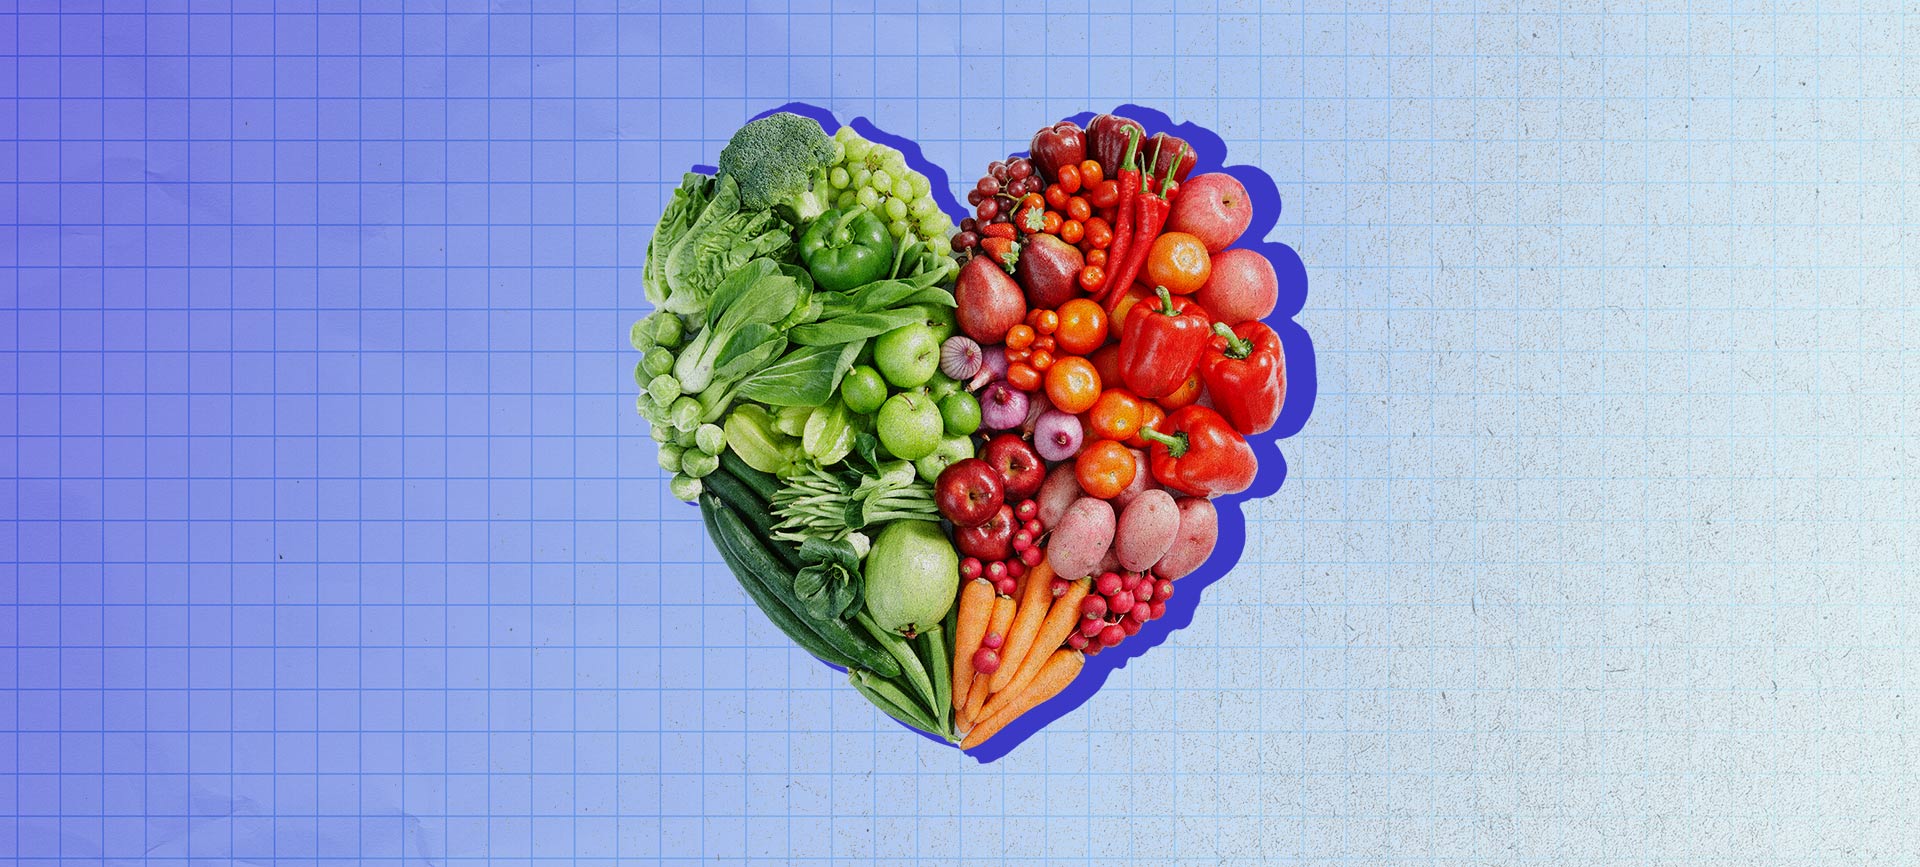 Vegetables are arranged in a heart.